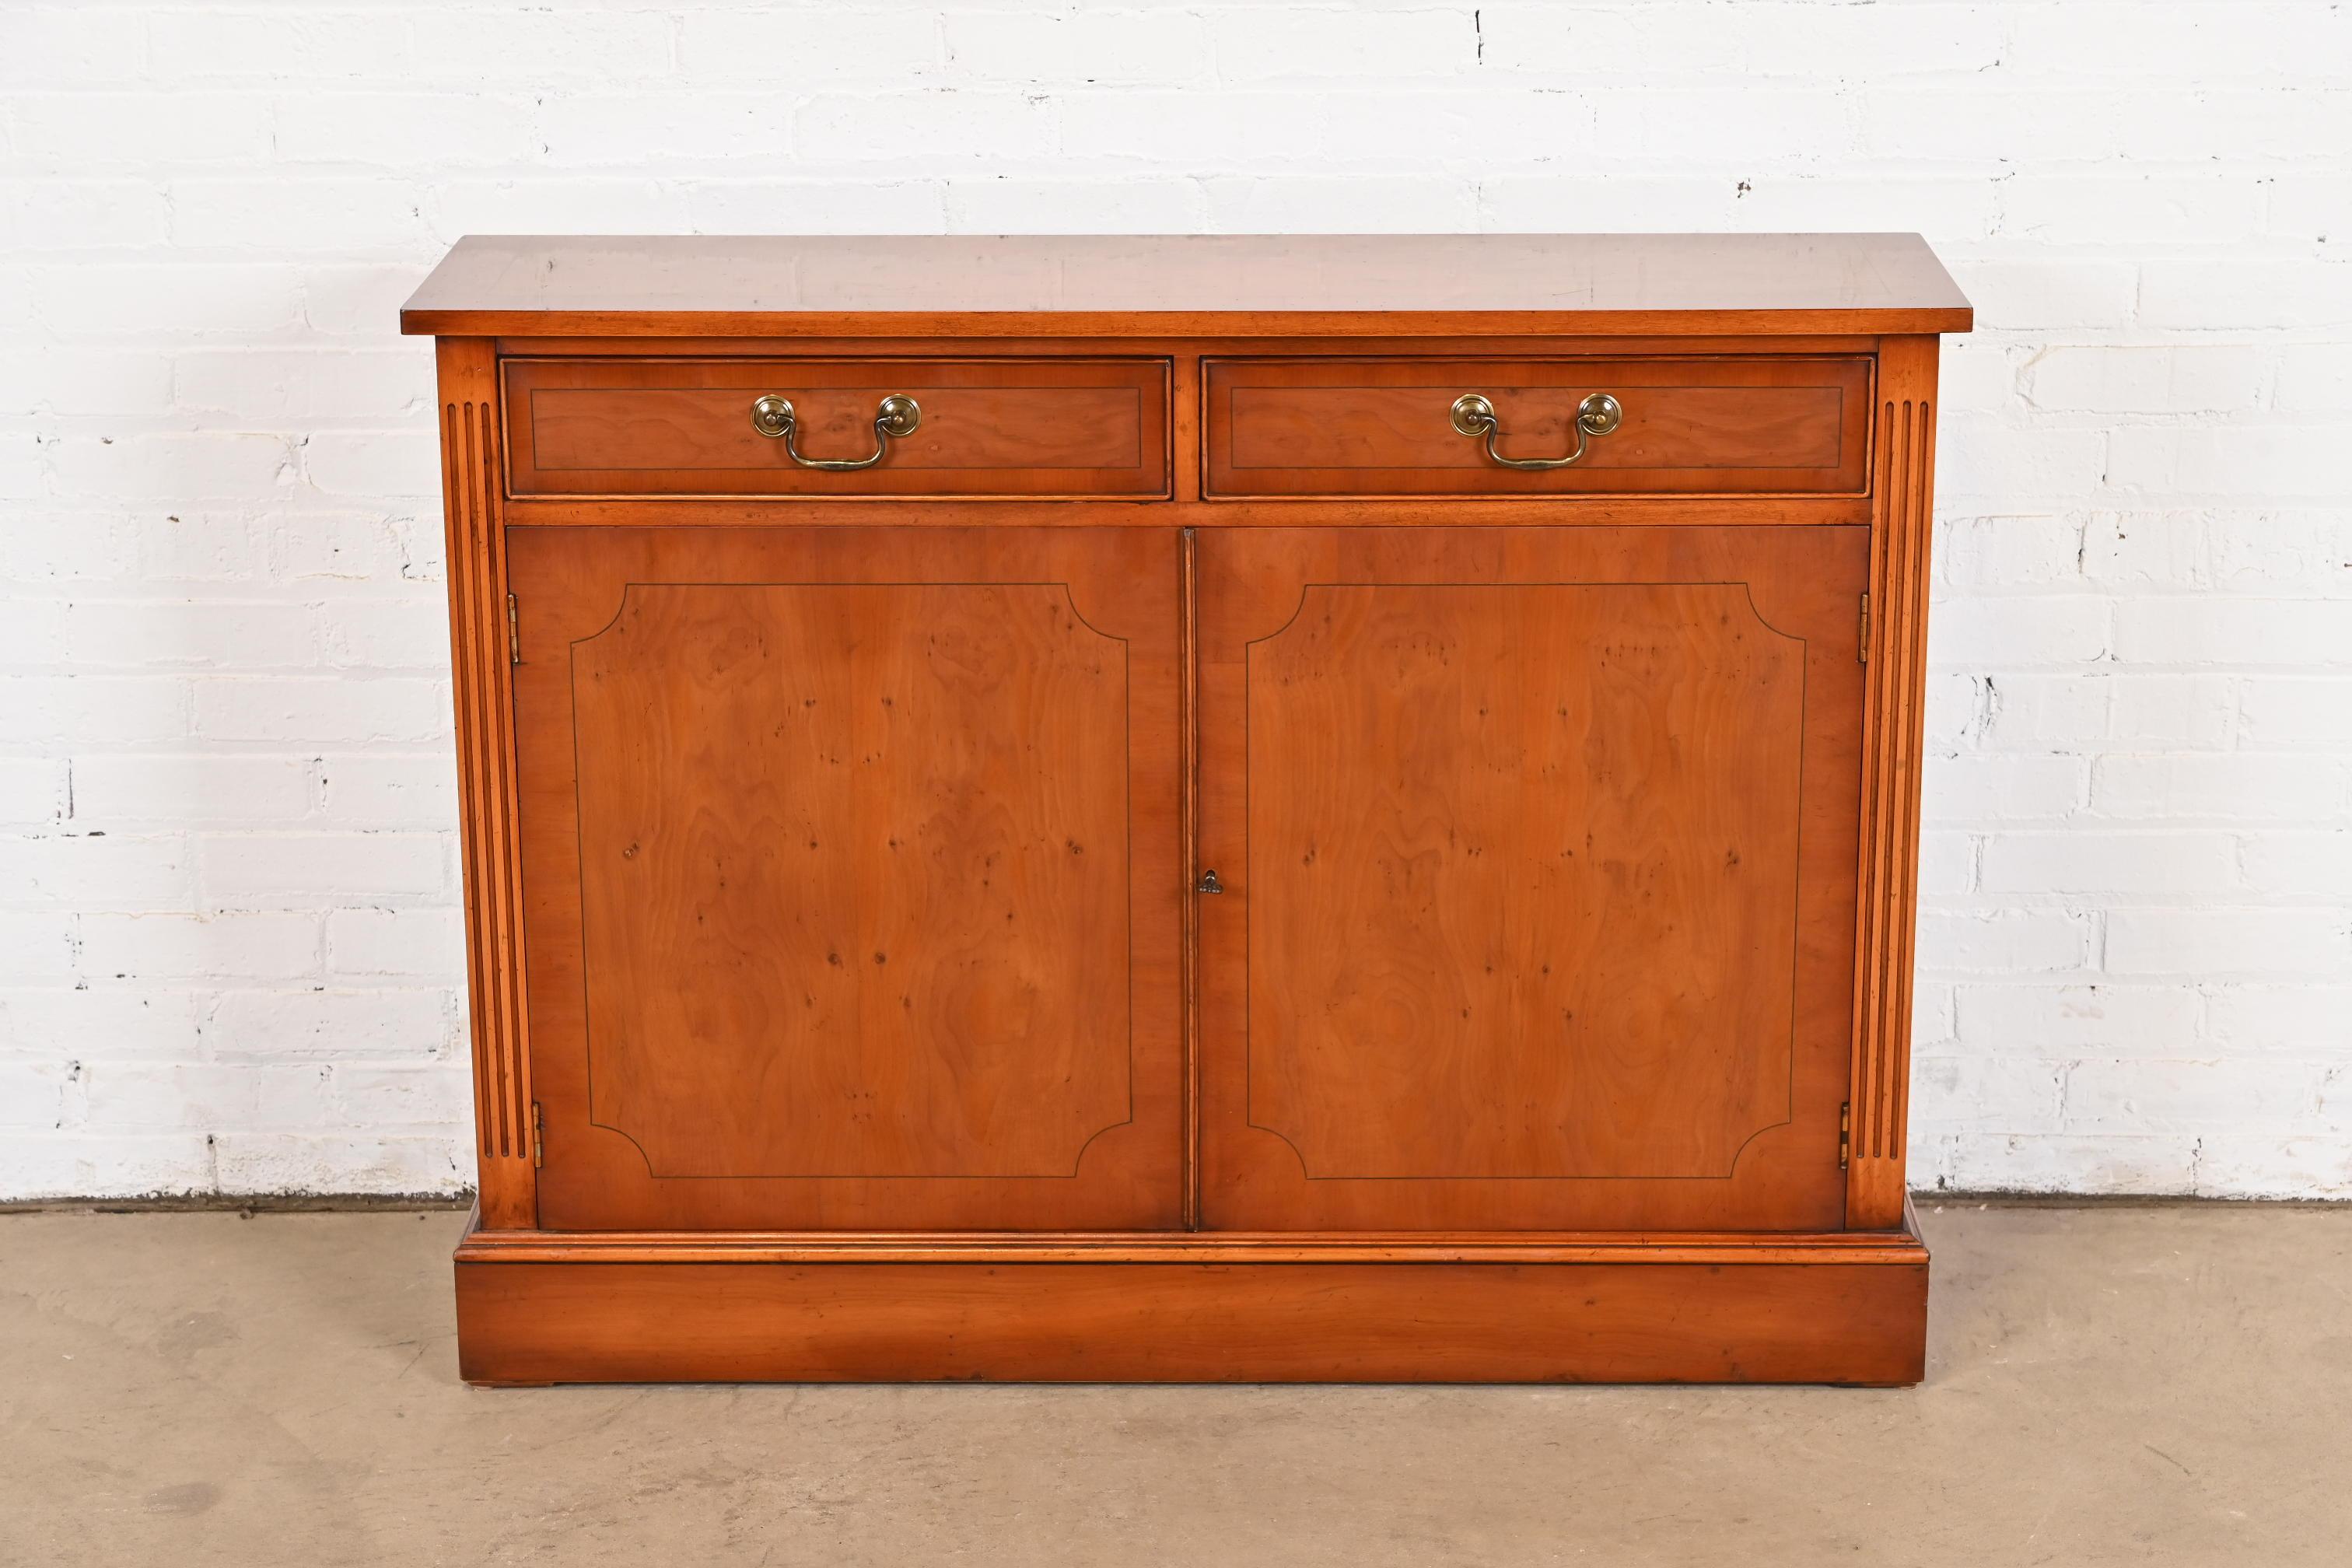 A gorgeous English Georgian style console, buffet server, or bar cabinet

In the manner of Baker Furniture

USA, Circa 1980s

Banded book-matched yew wood, with original brass hardware. Cabinet locks, and key is included.

Measures: 45